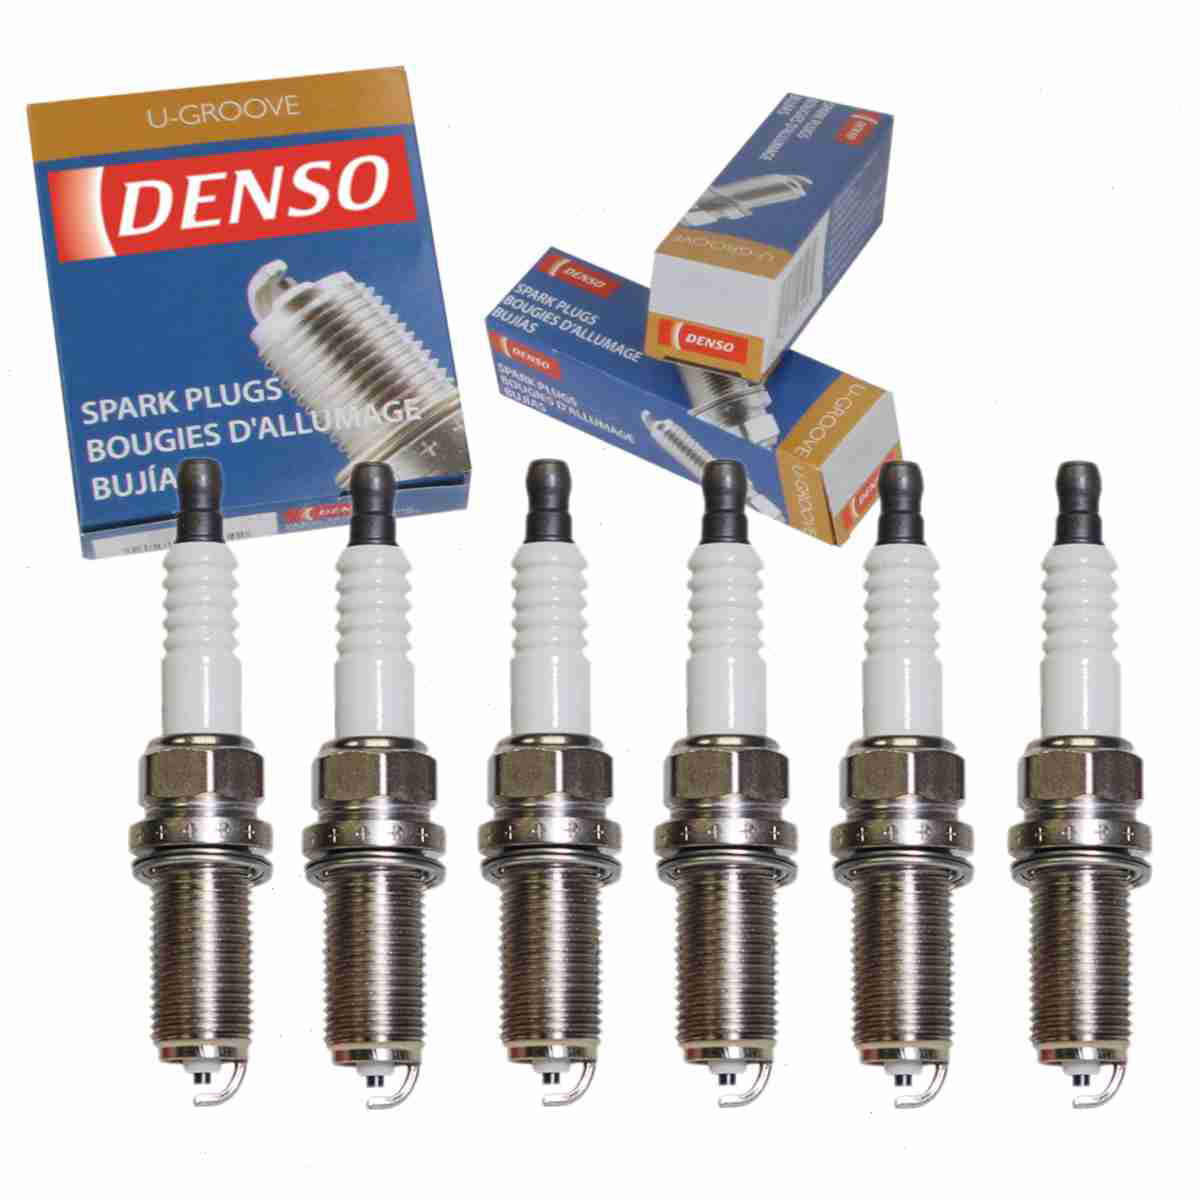 6 pc DENSO Standard U-Groove Spark Plugs compatible with Nissan